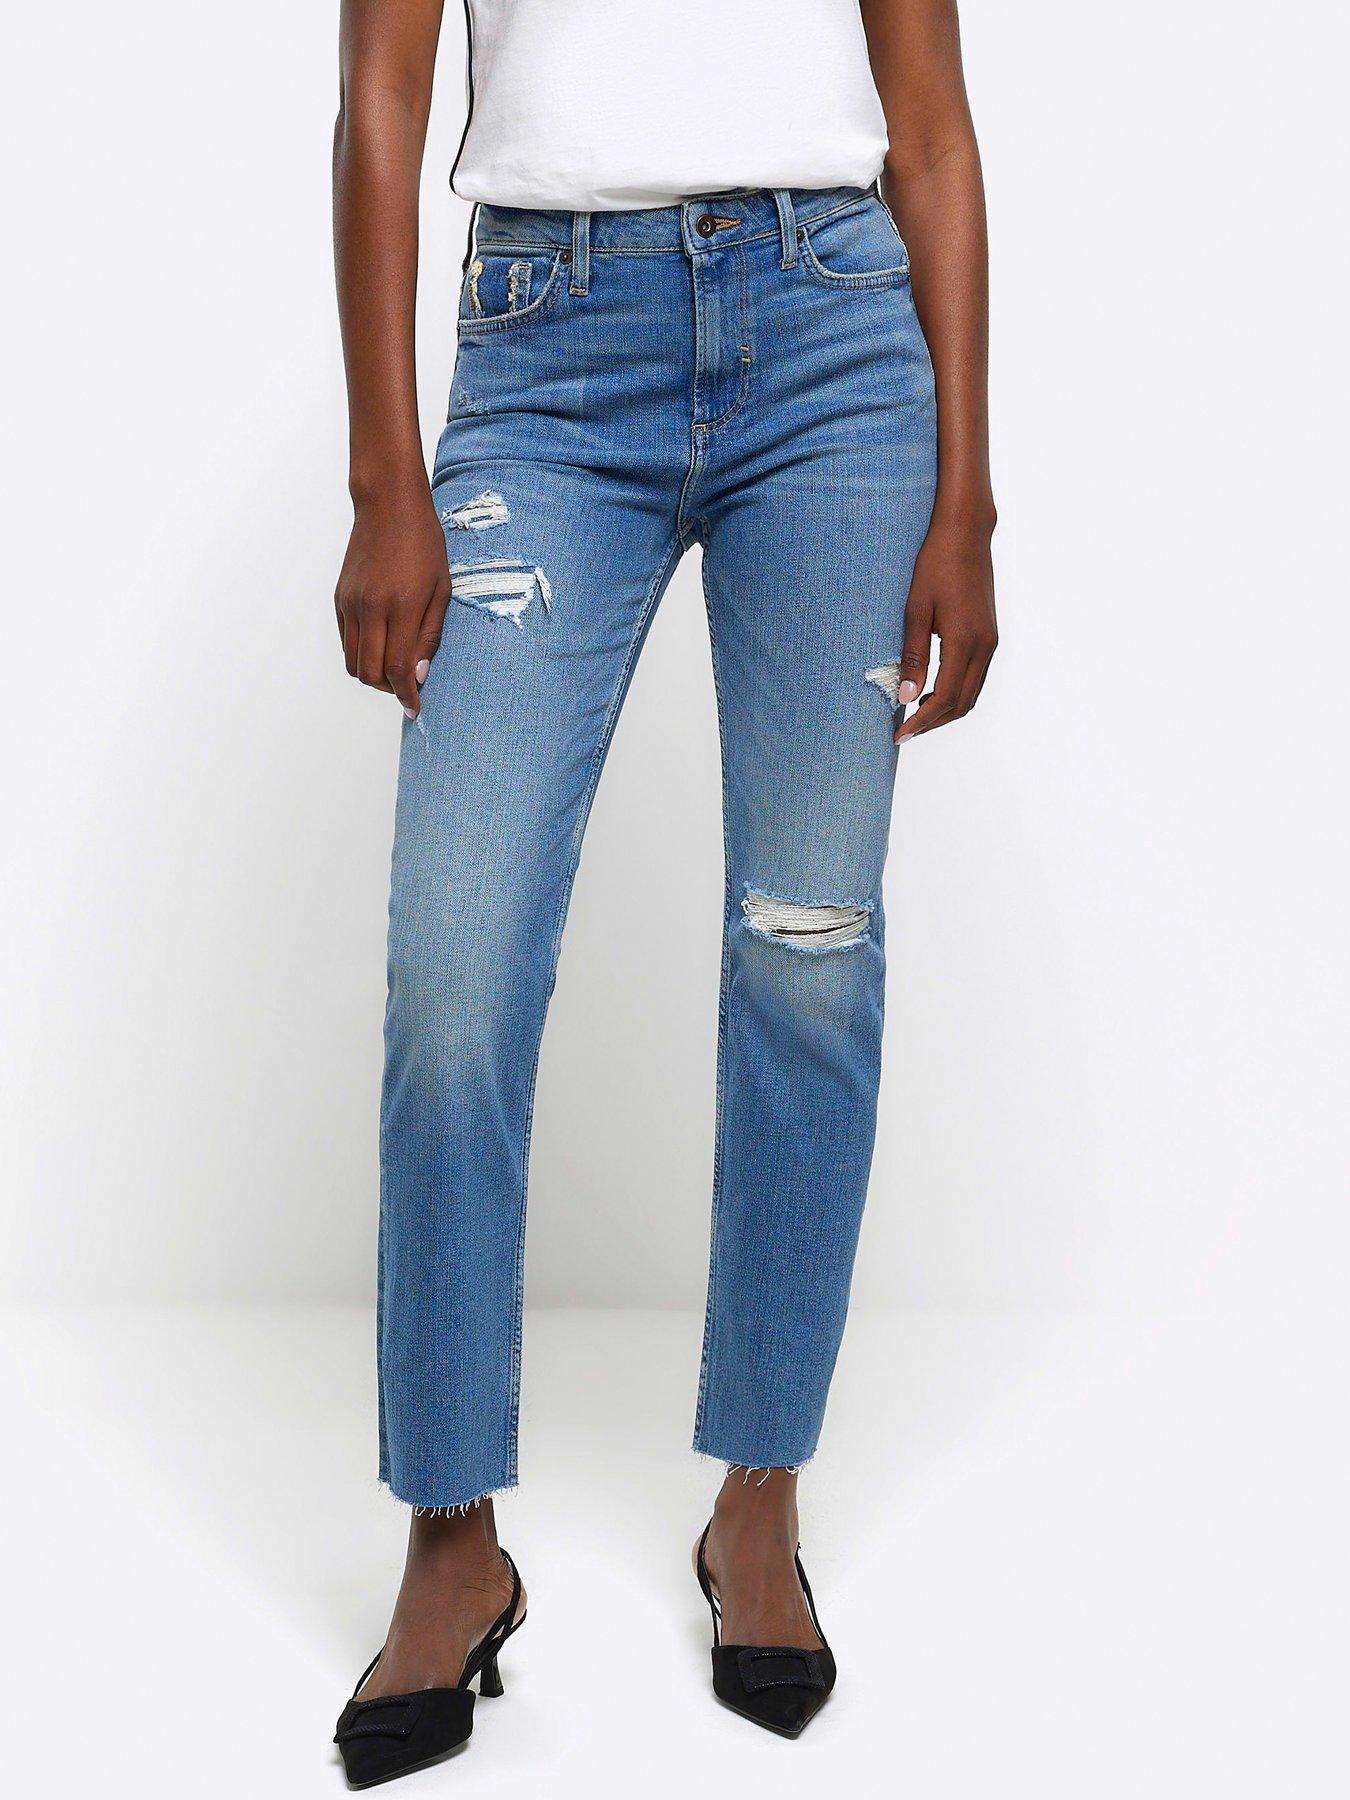 River Island mid rise flared jeans in medium blue